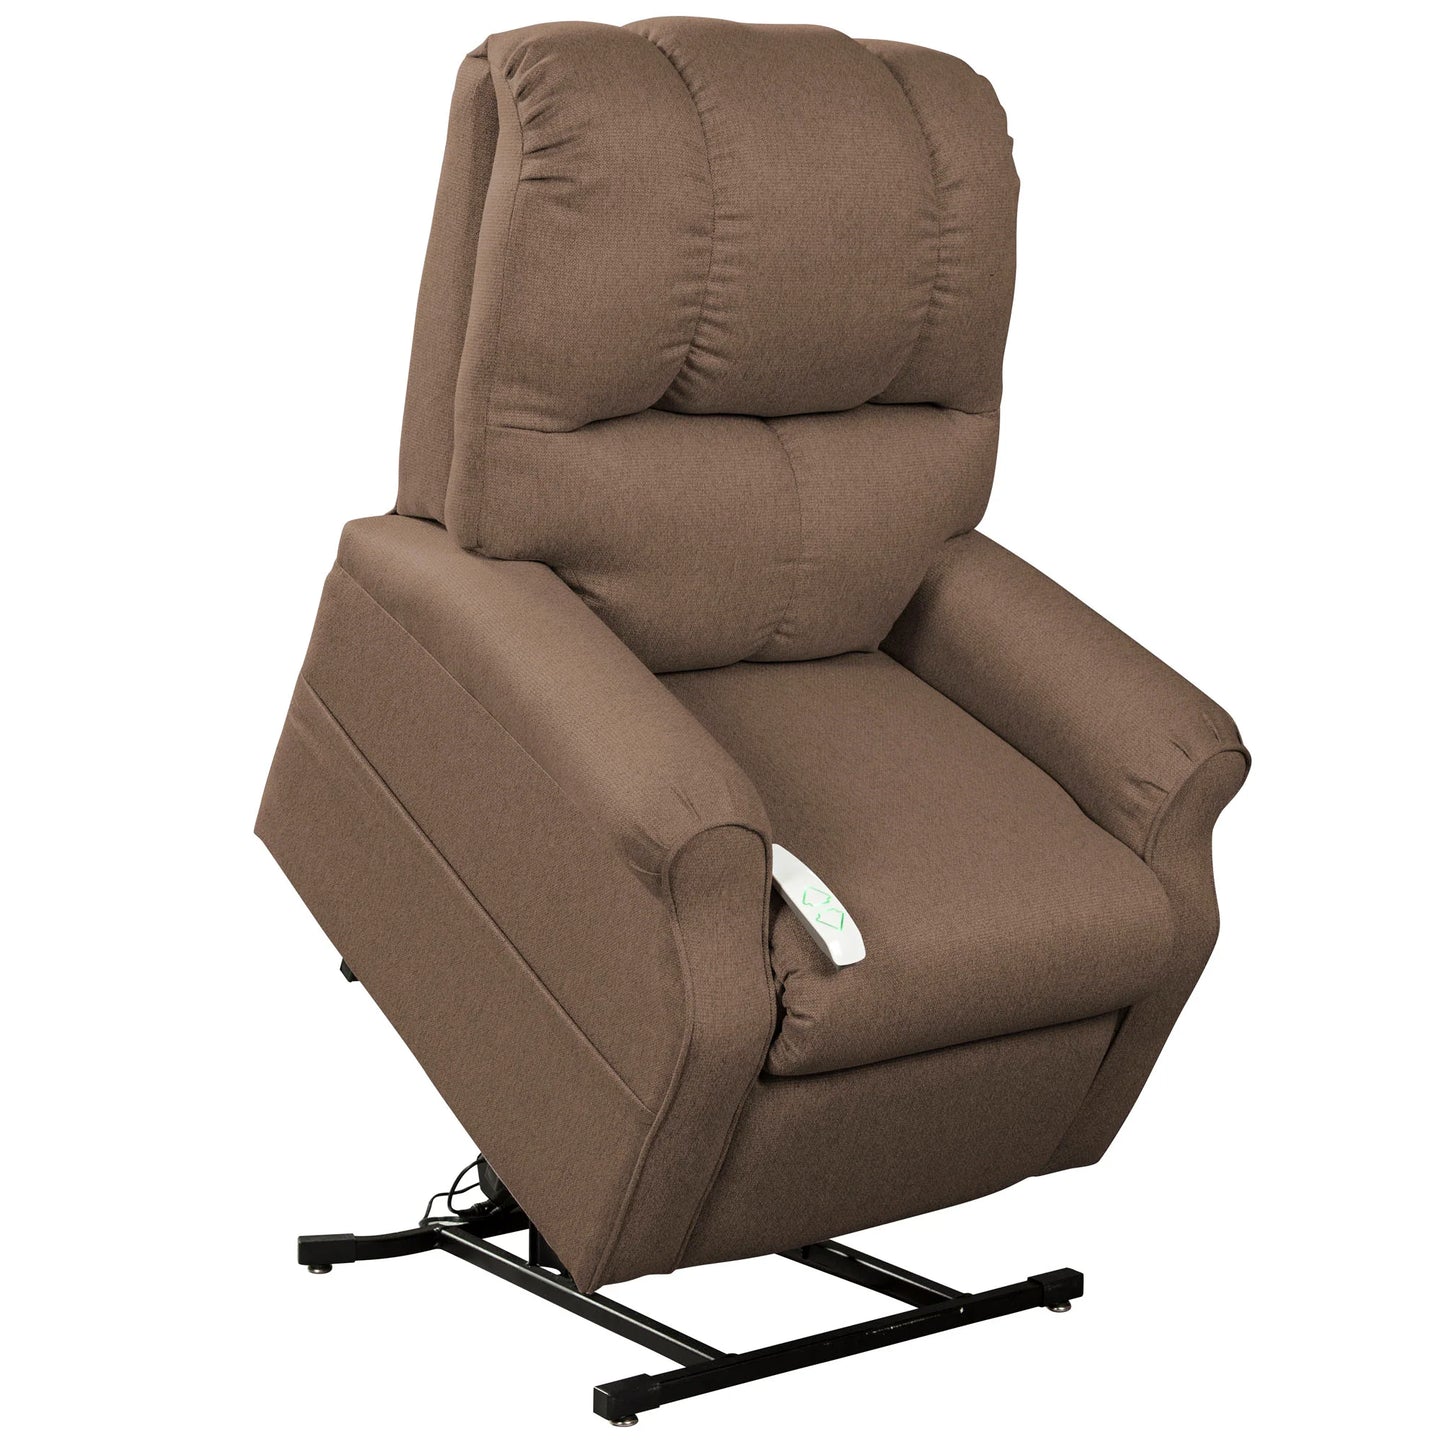 MM-2001 Chaise Lounger